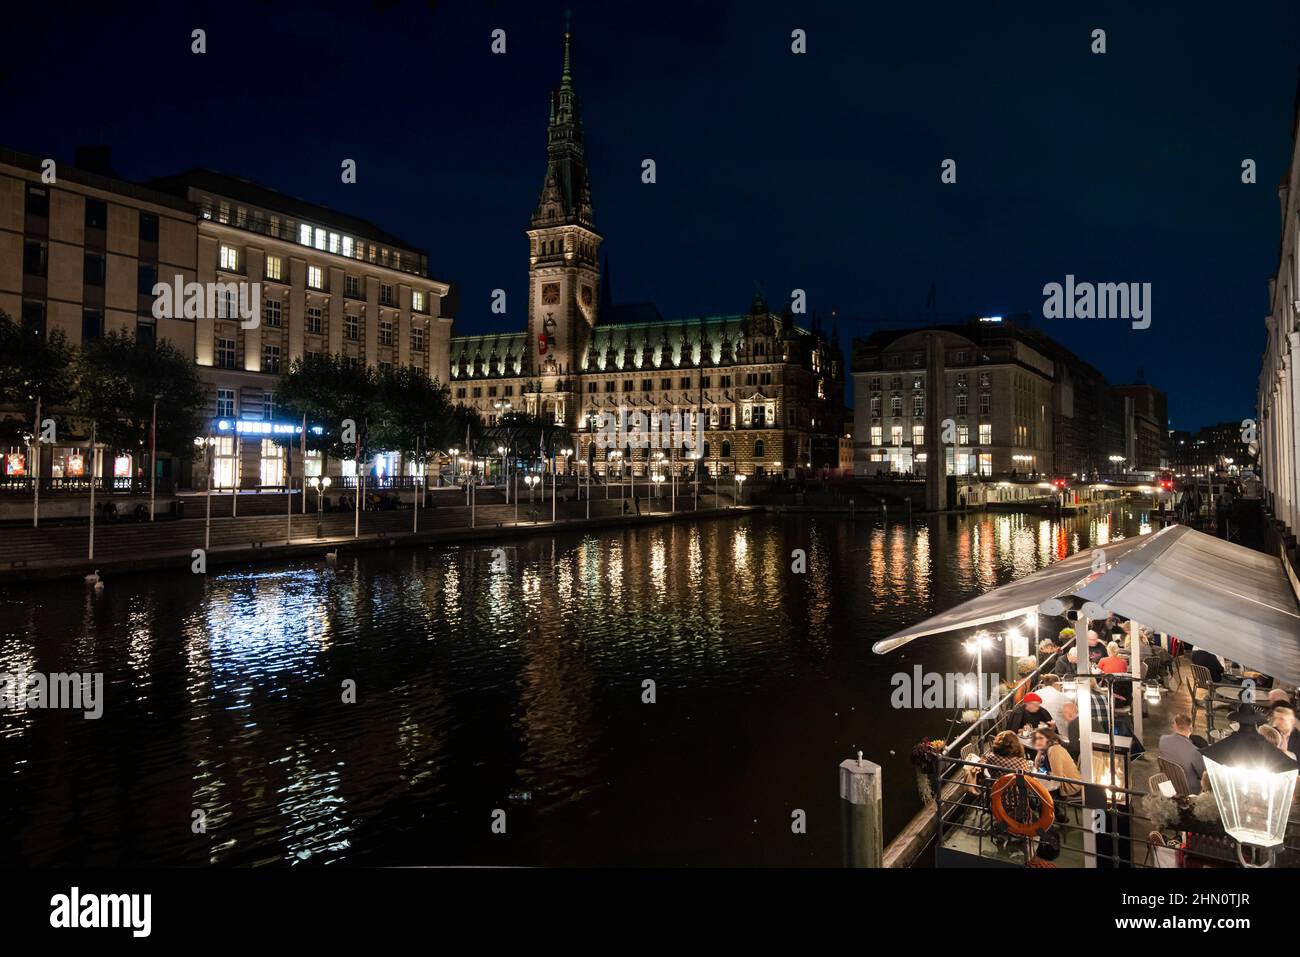 September 27 2018: Night view of the Hamburg city hall from the bridge in Alster Arkaden and one of its terraces on the banks of the Alster river Stock Photo